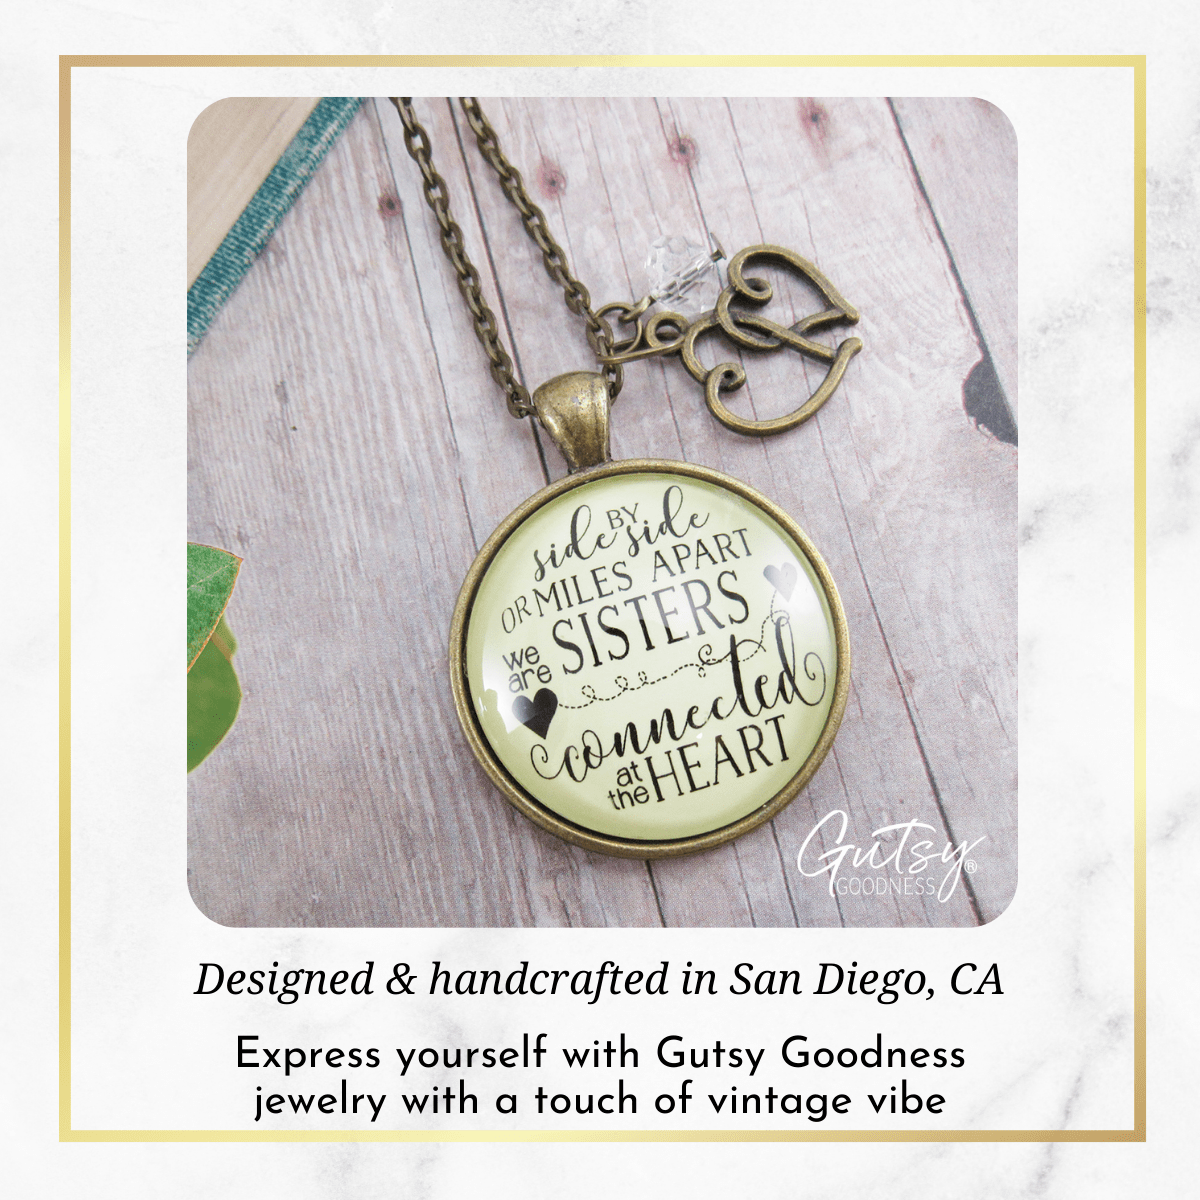 Gutsy Goodness Love My Sister Necklace Side by Side Long Distance BFF Jewelry Gift - Gutsy Goodness;Love My Sister Necklace Side By Side Long Distance Bff Jewelry Gift - Gutsy Goodness Handmade Jewelry Gifts